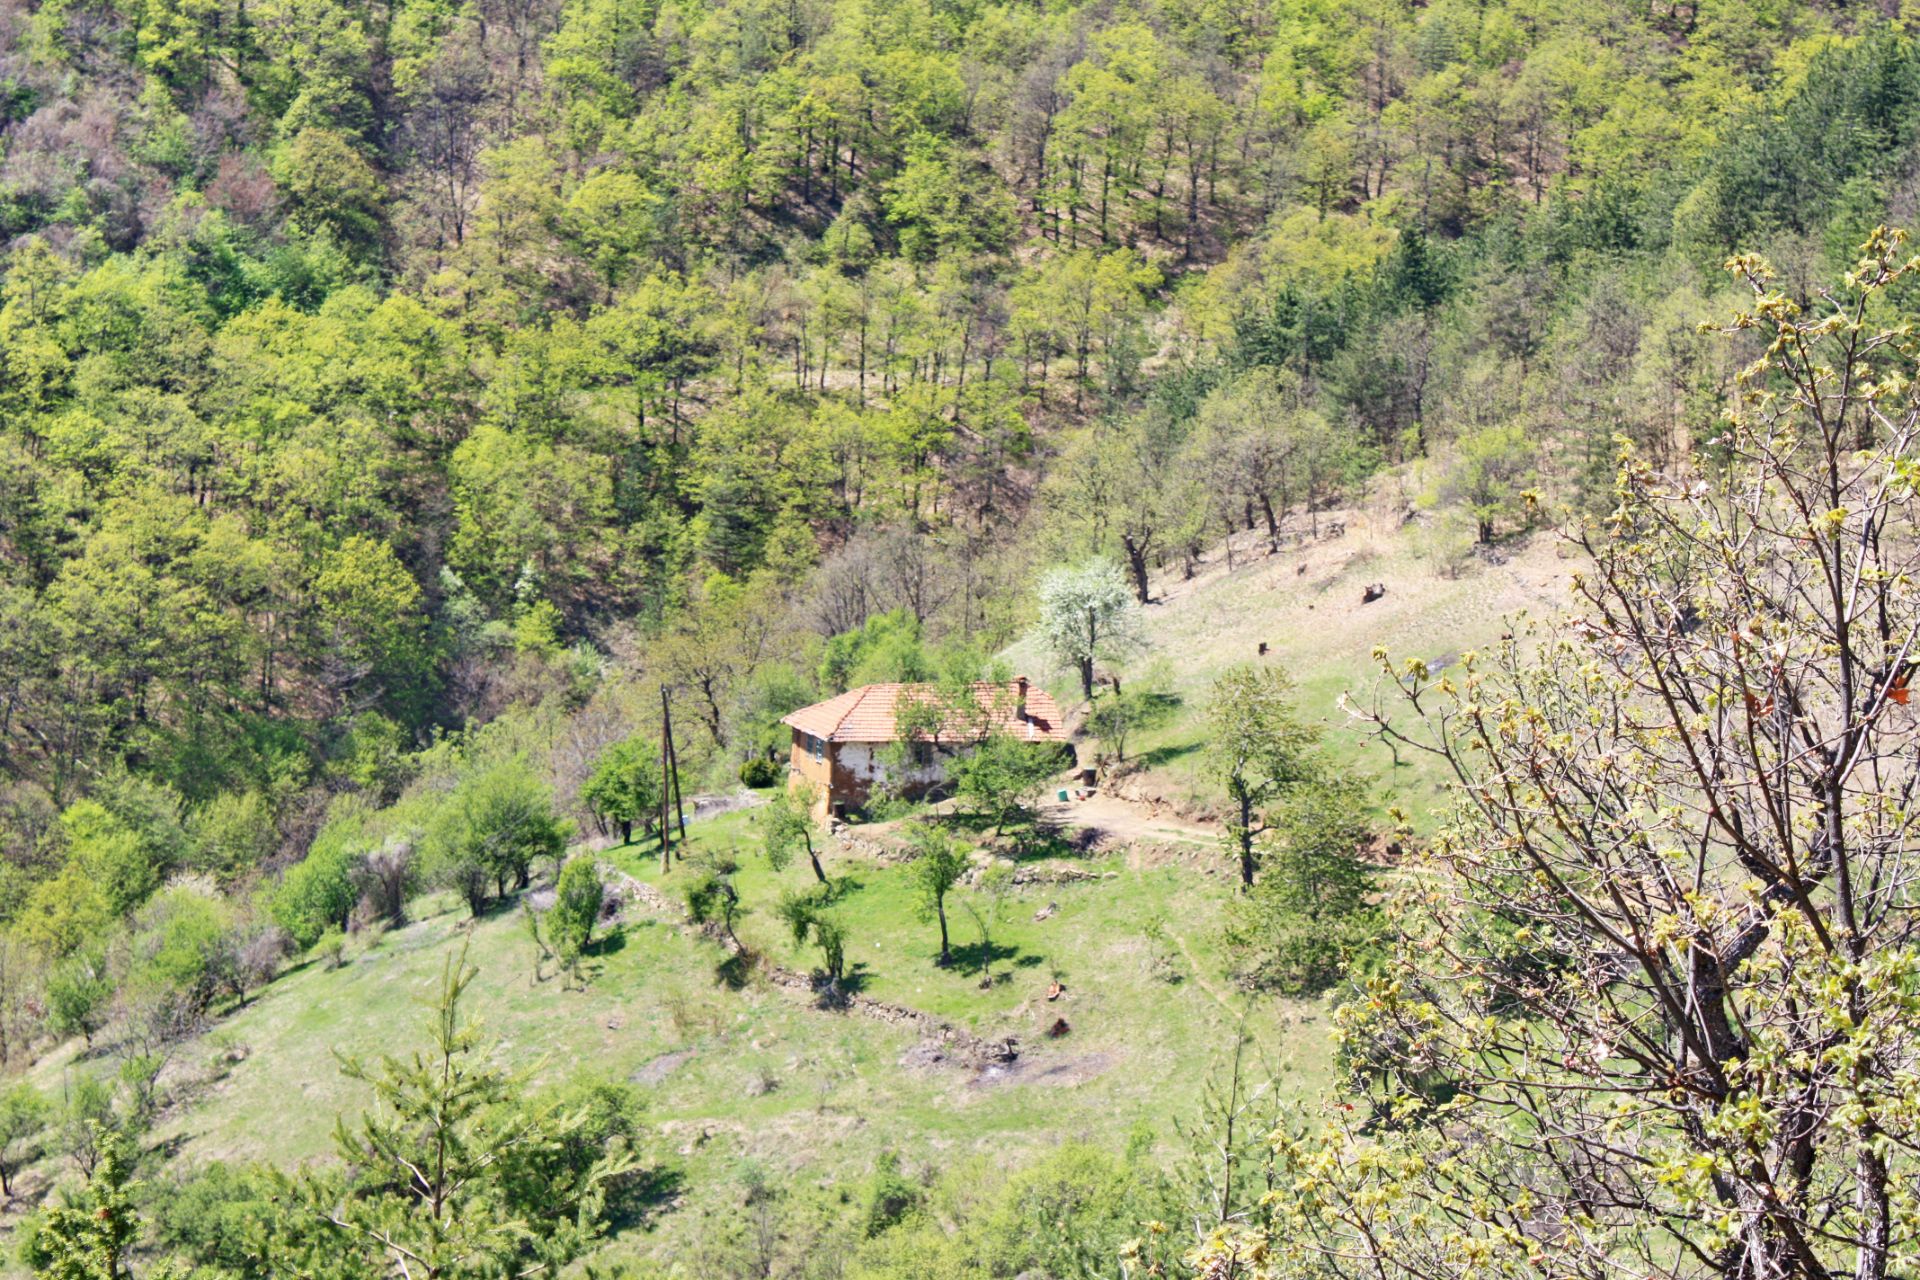 7.5 Acre Ranch in Bulgaria 1h from Sofia - Image 10 of 33